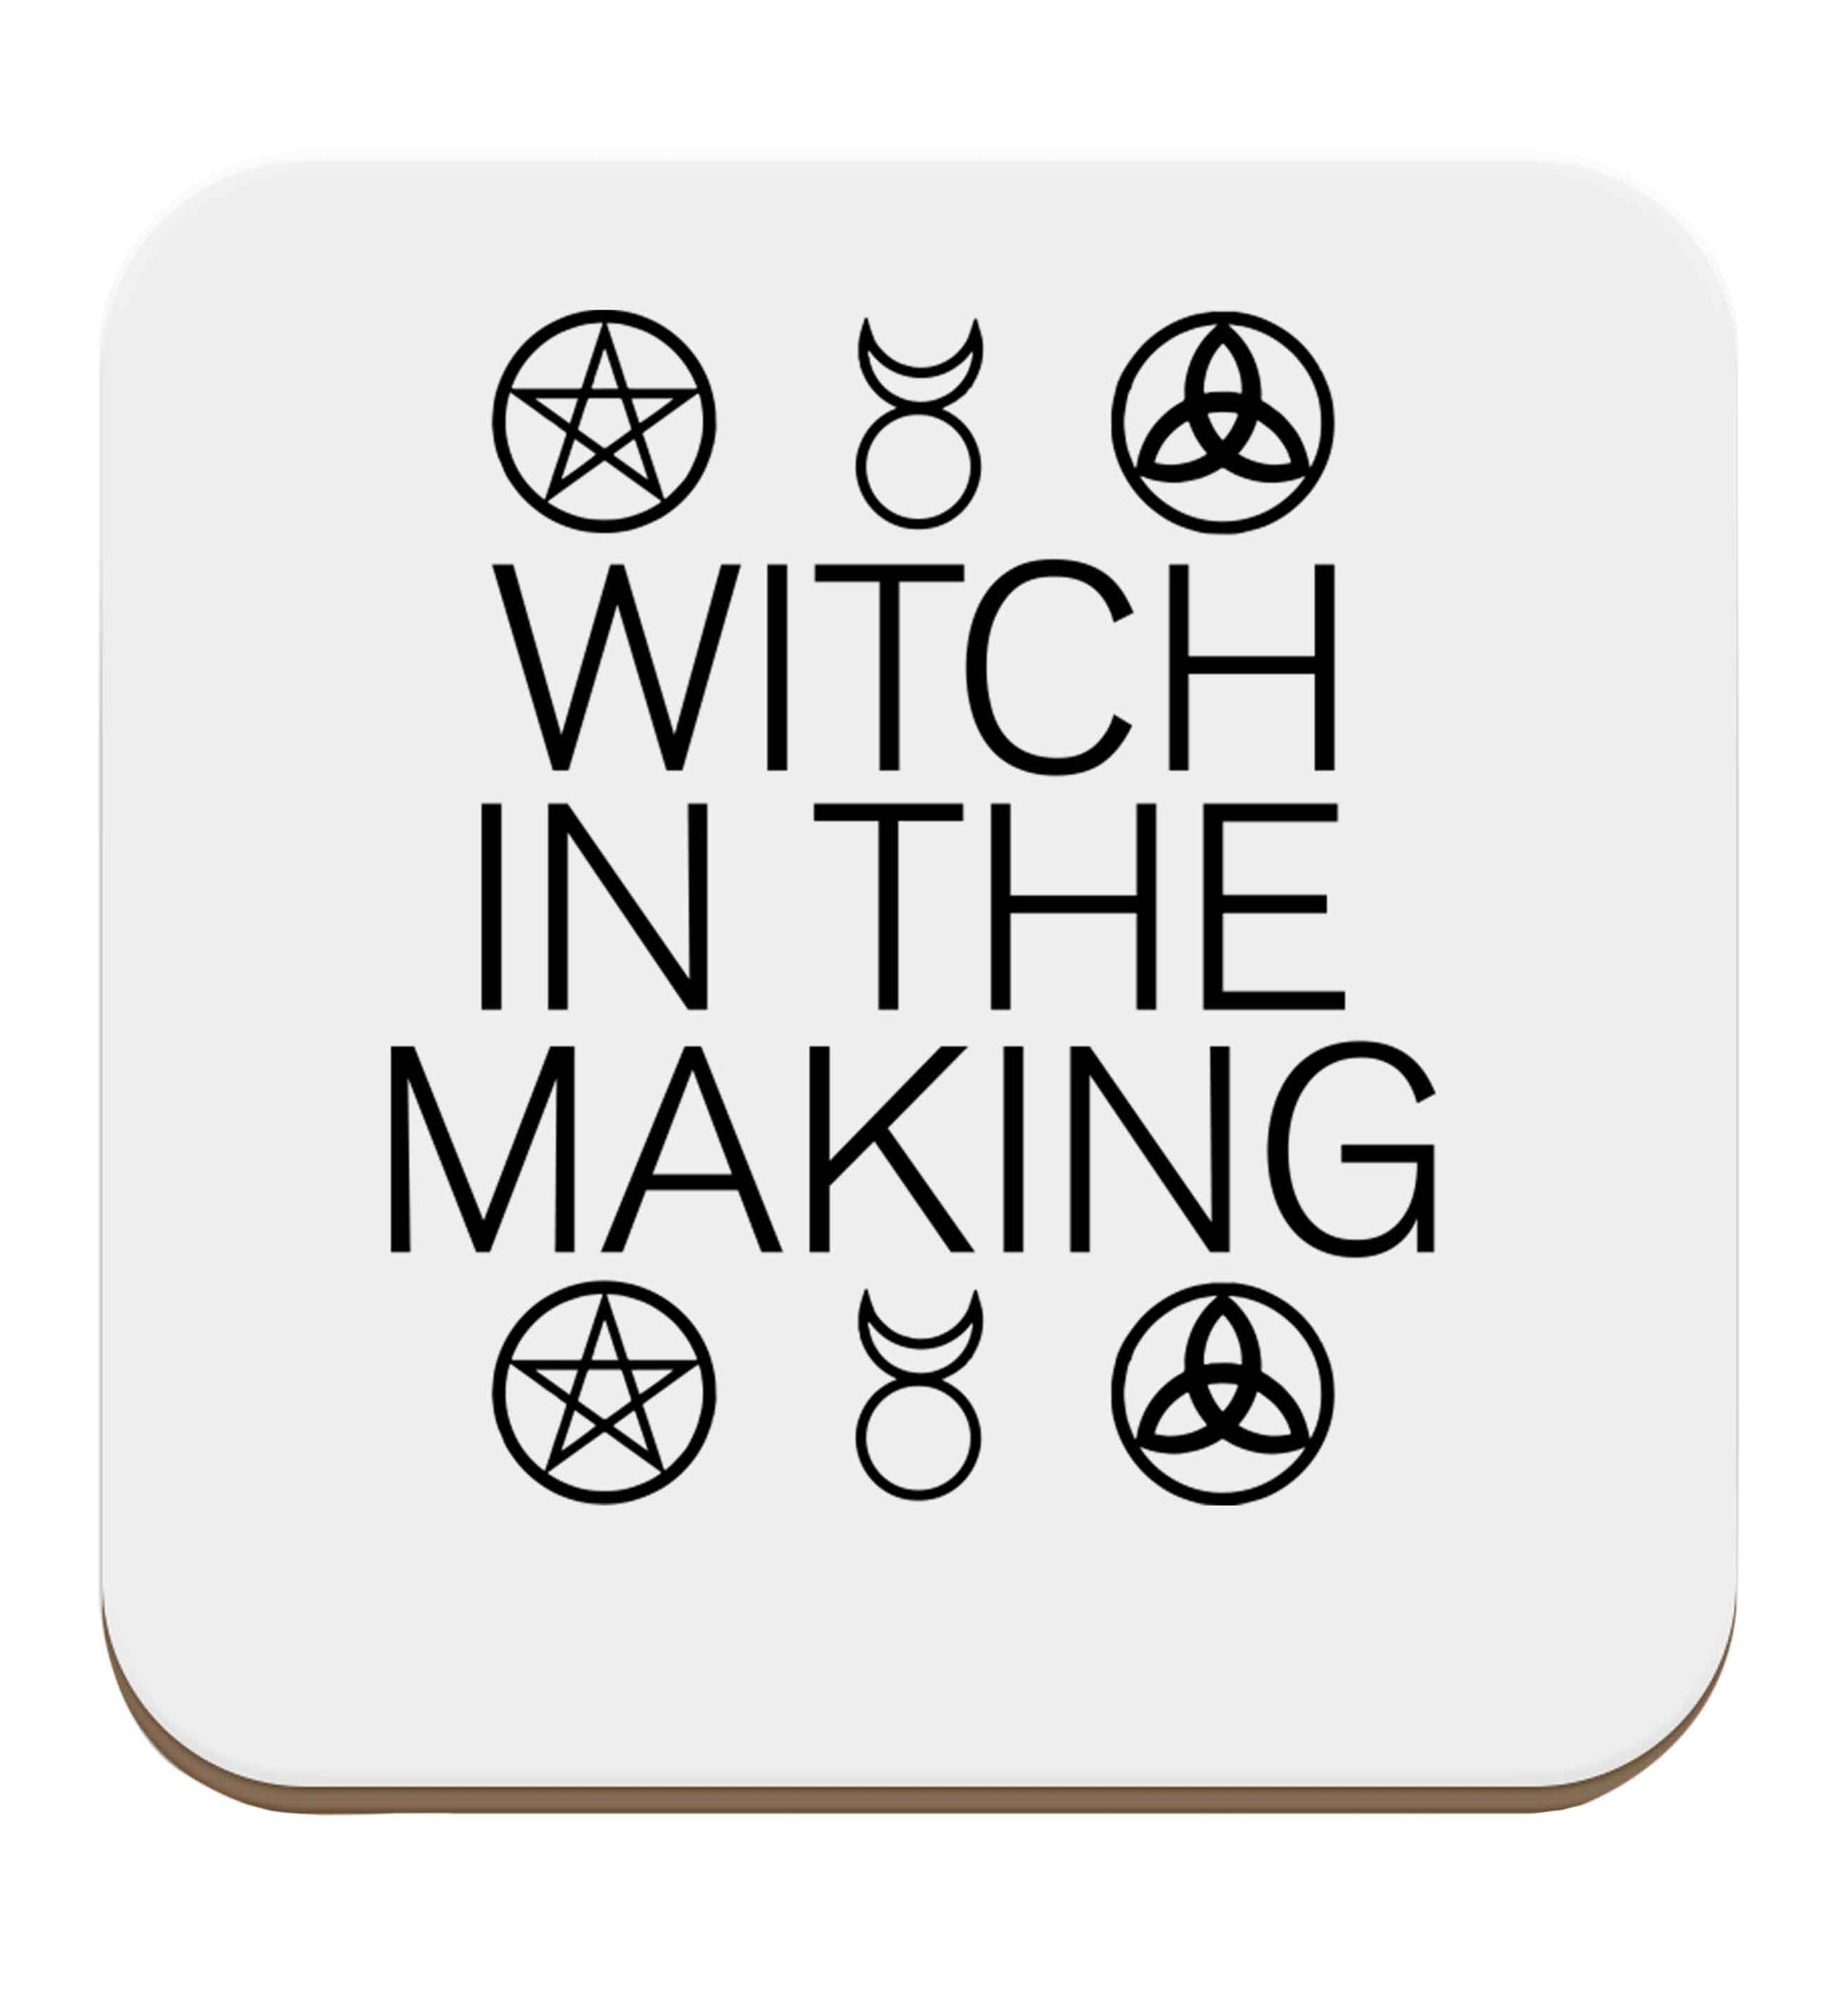 Witch in the making set of four coasters